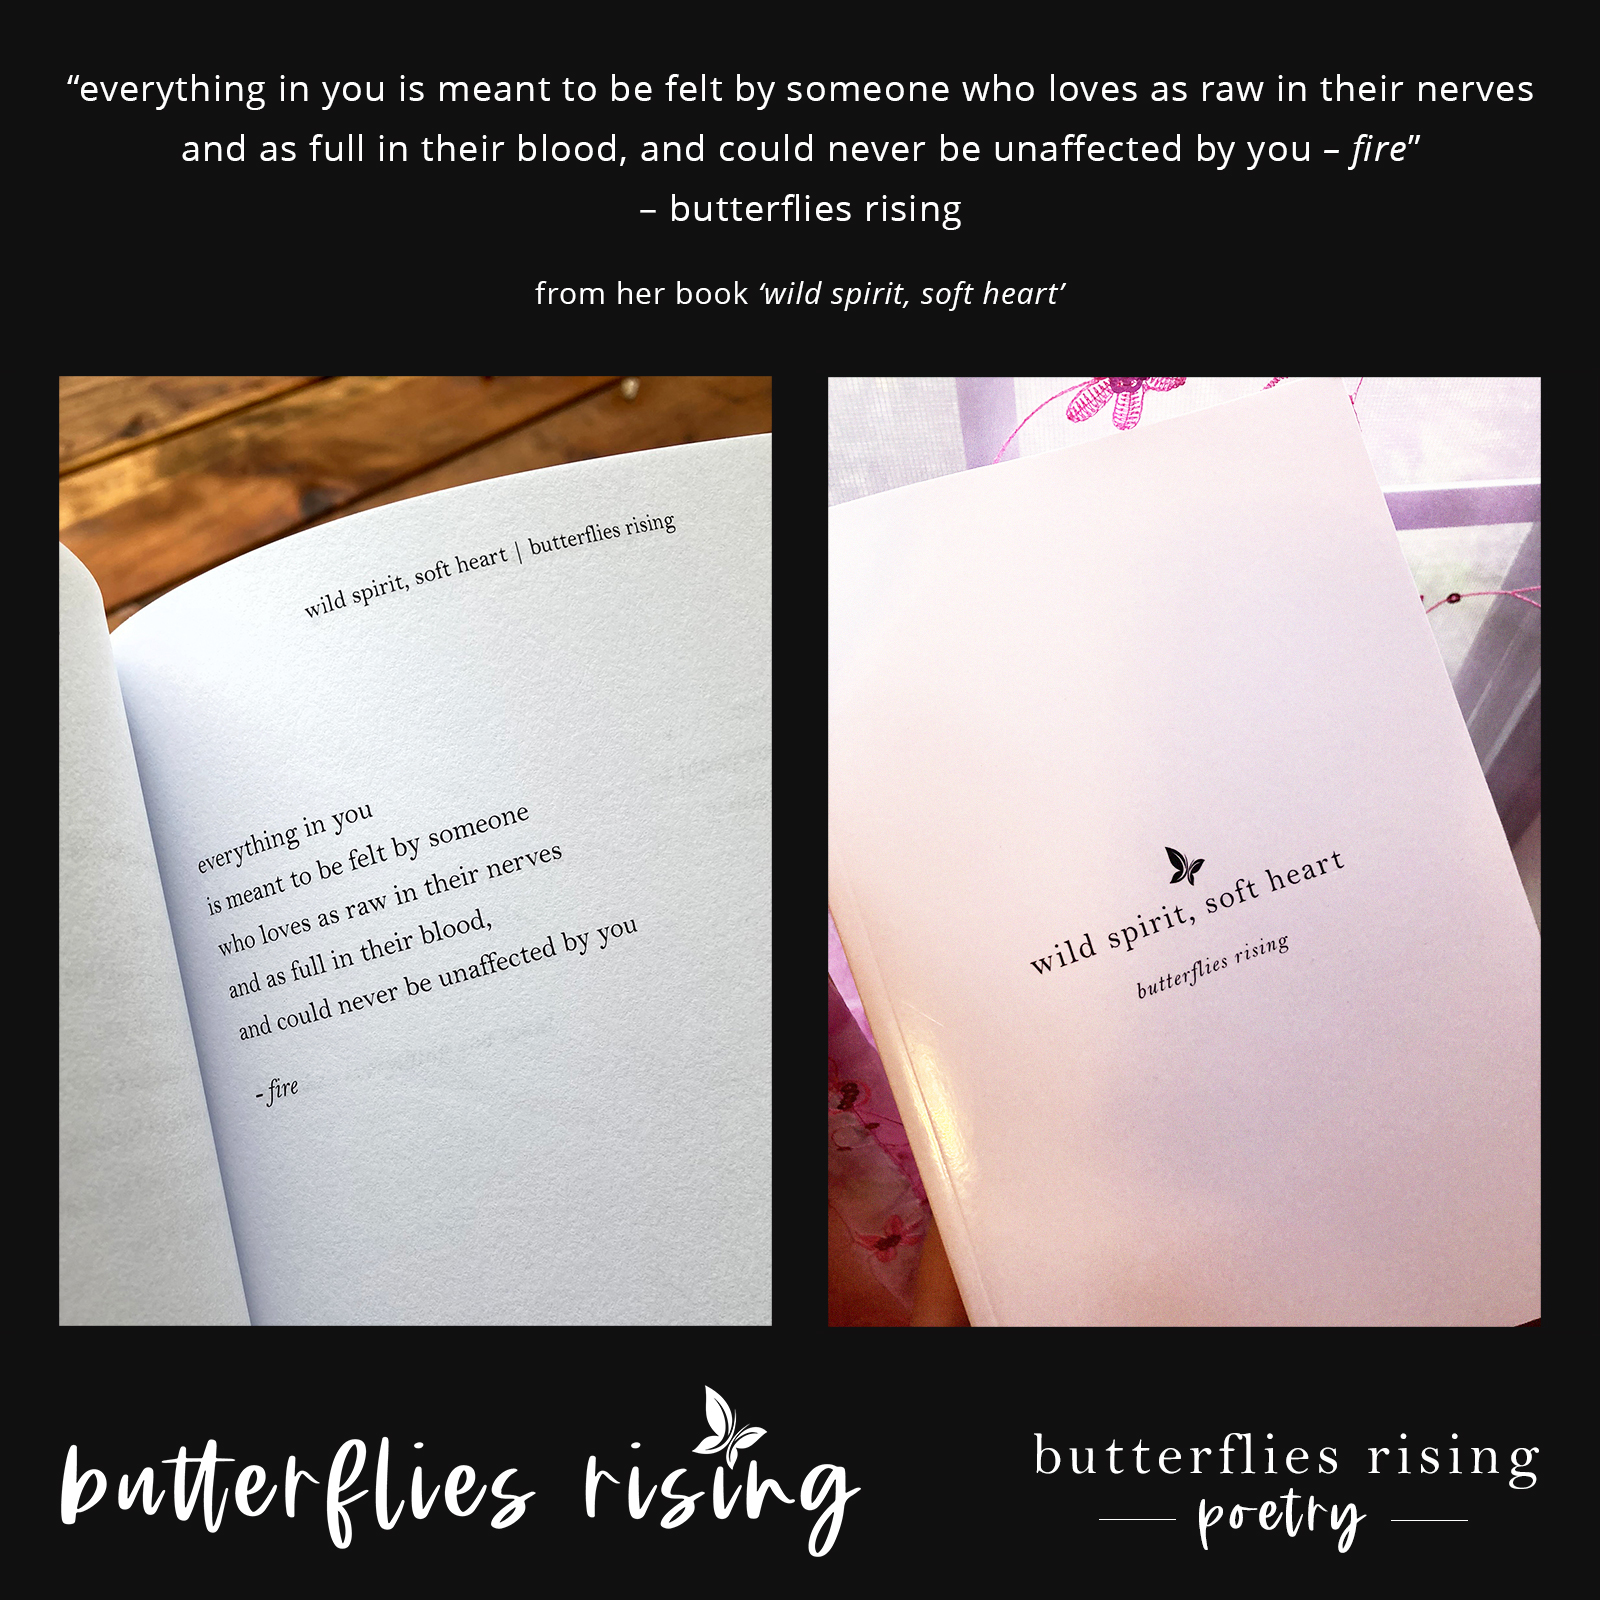 everything in you is meant to be felt by someone who loves as raw in their nerves - butterflies rising